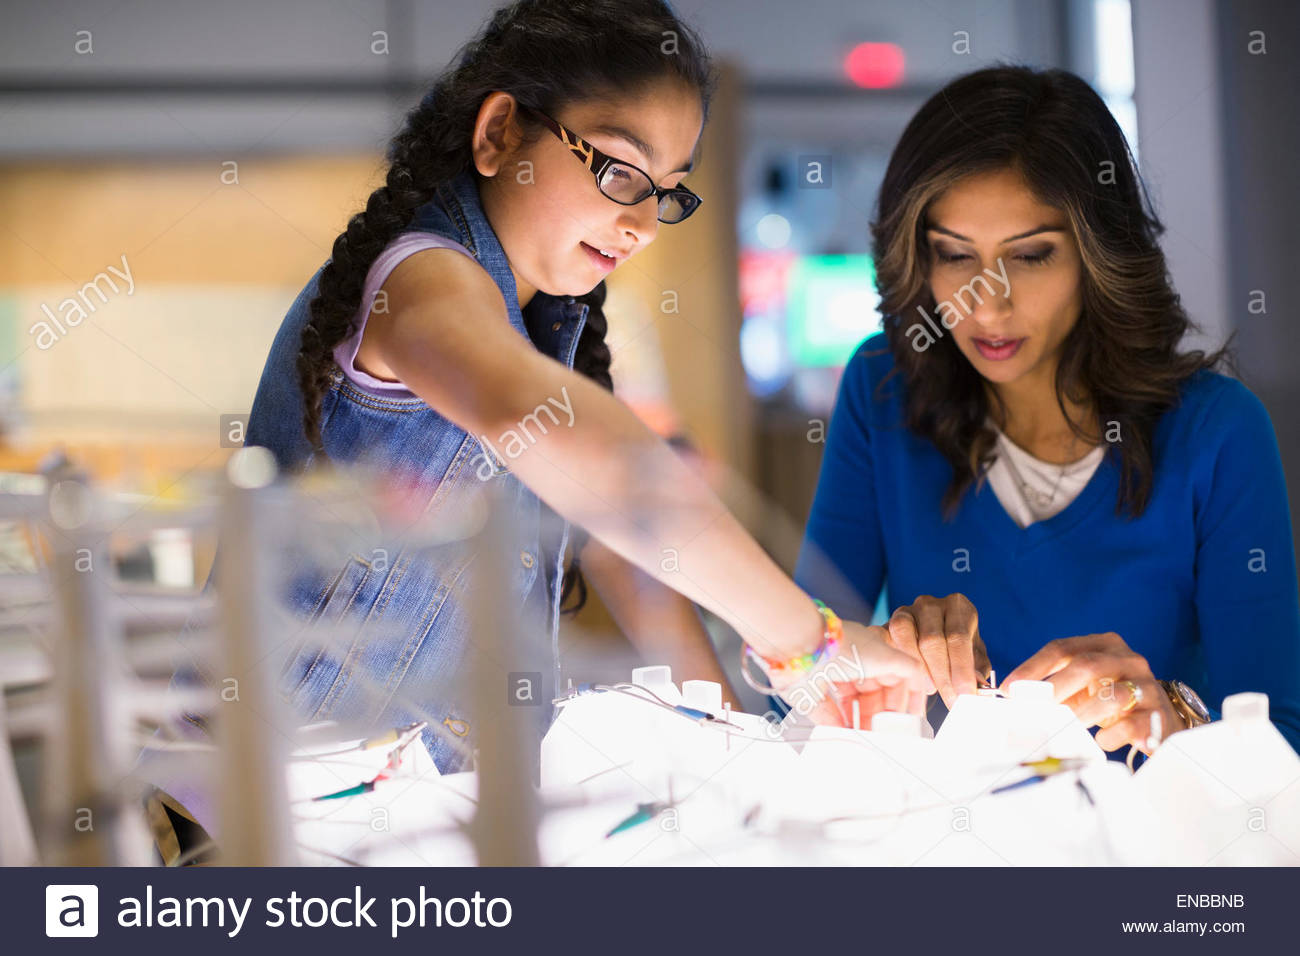 Mother daughter playing electricity exhibit at science center Stock Photo